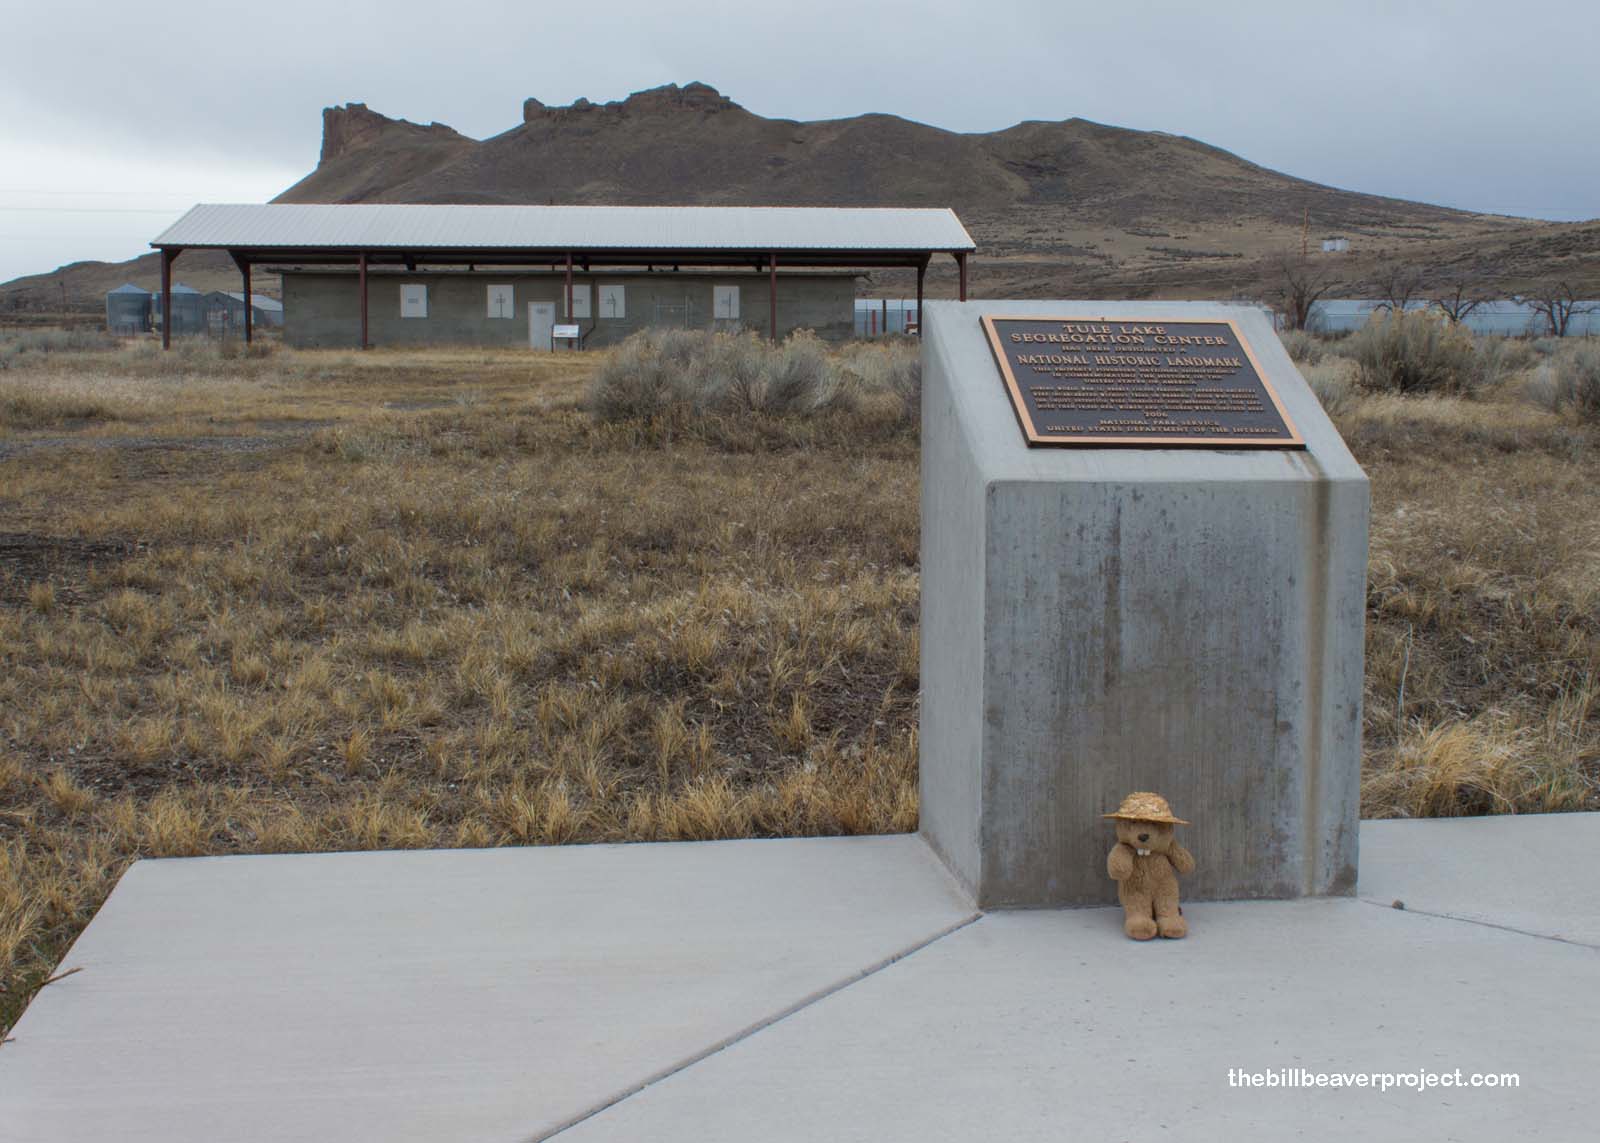 This is the last standing jail from this internment camp!